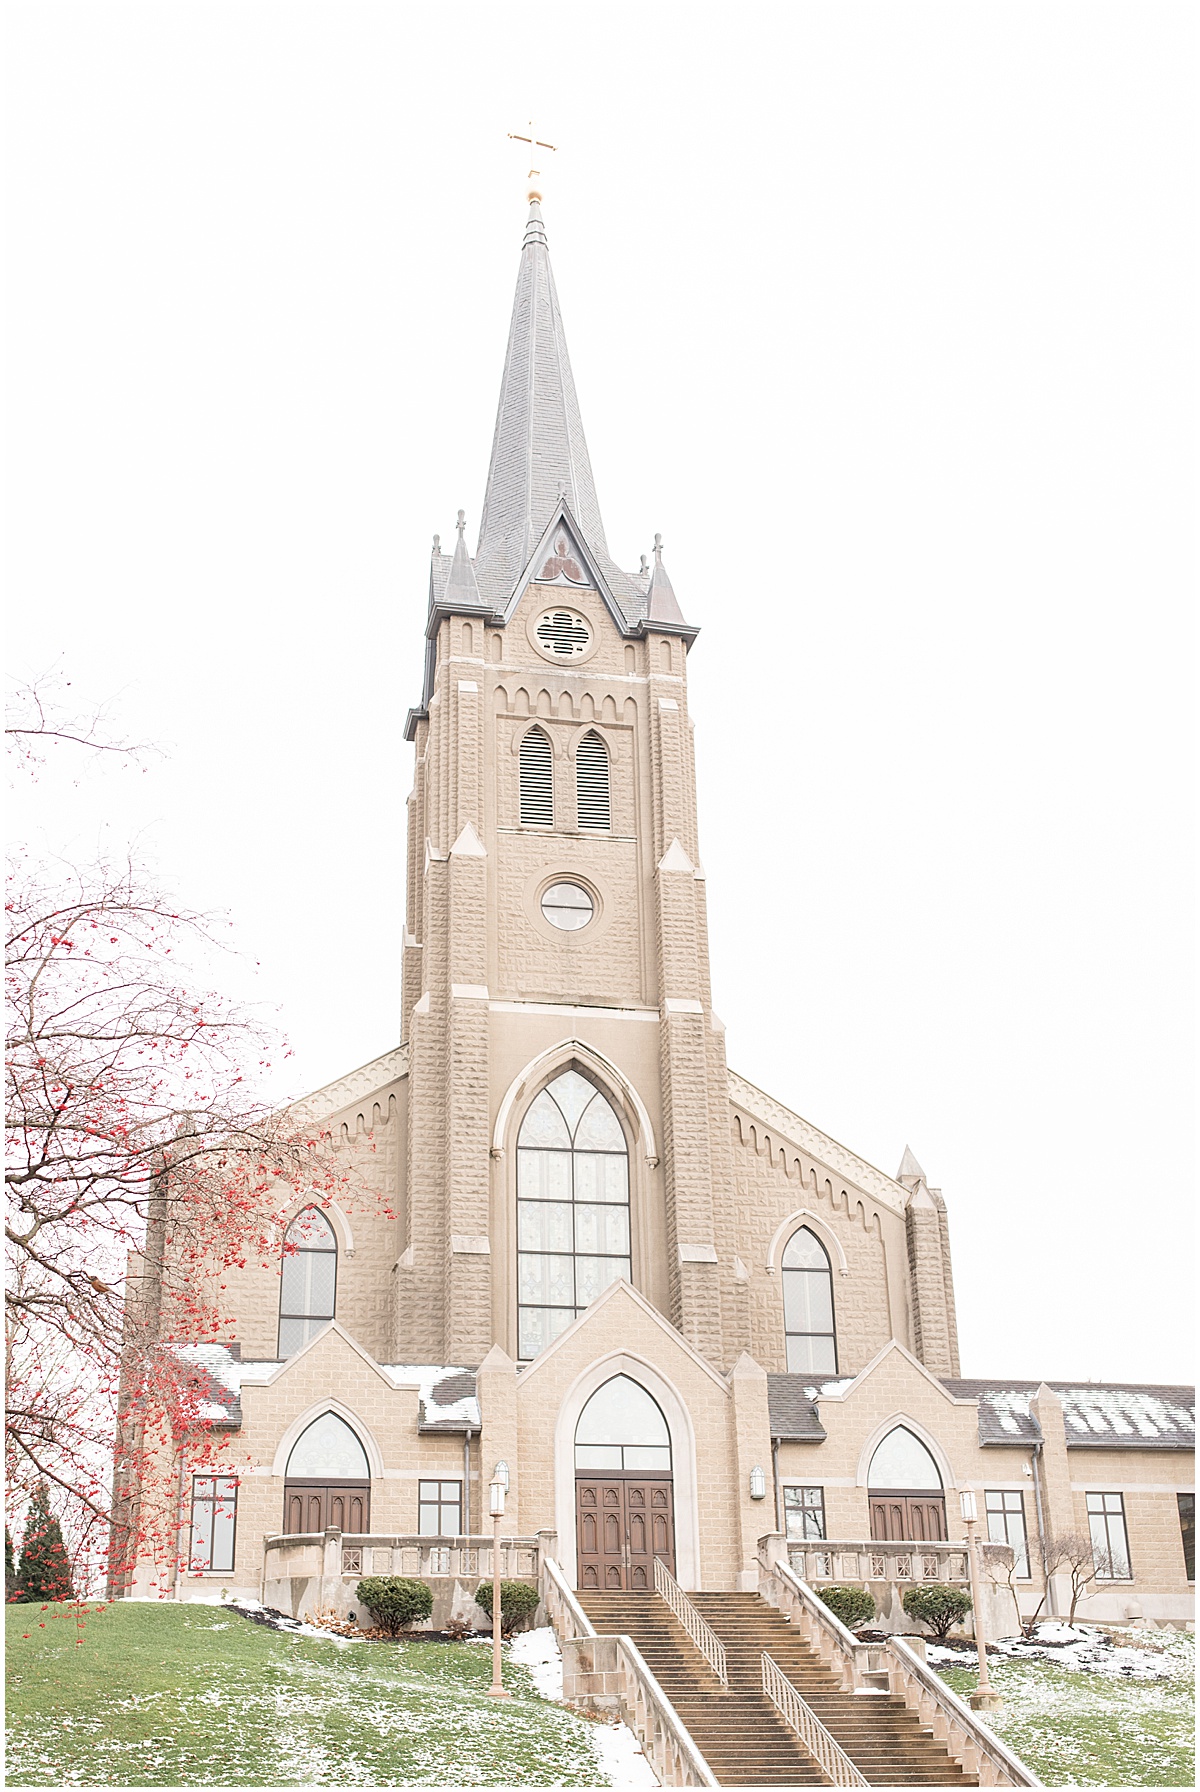 Cathedral of Saint Mary of the Immaculate Conception in Lafayette, Indiana